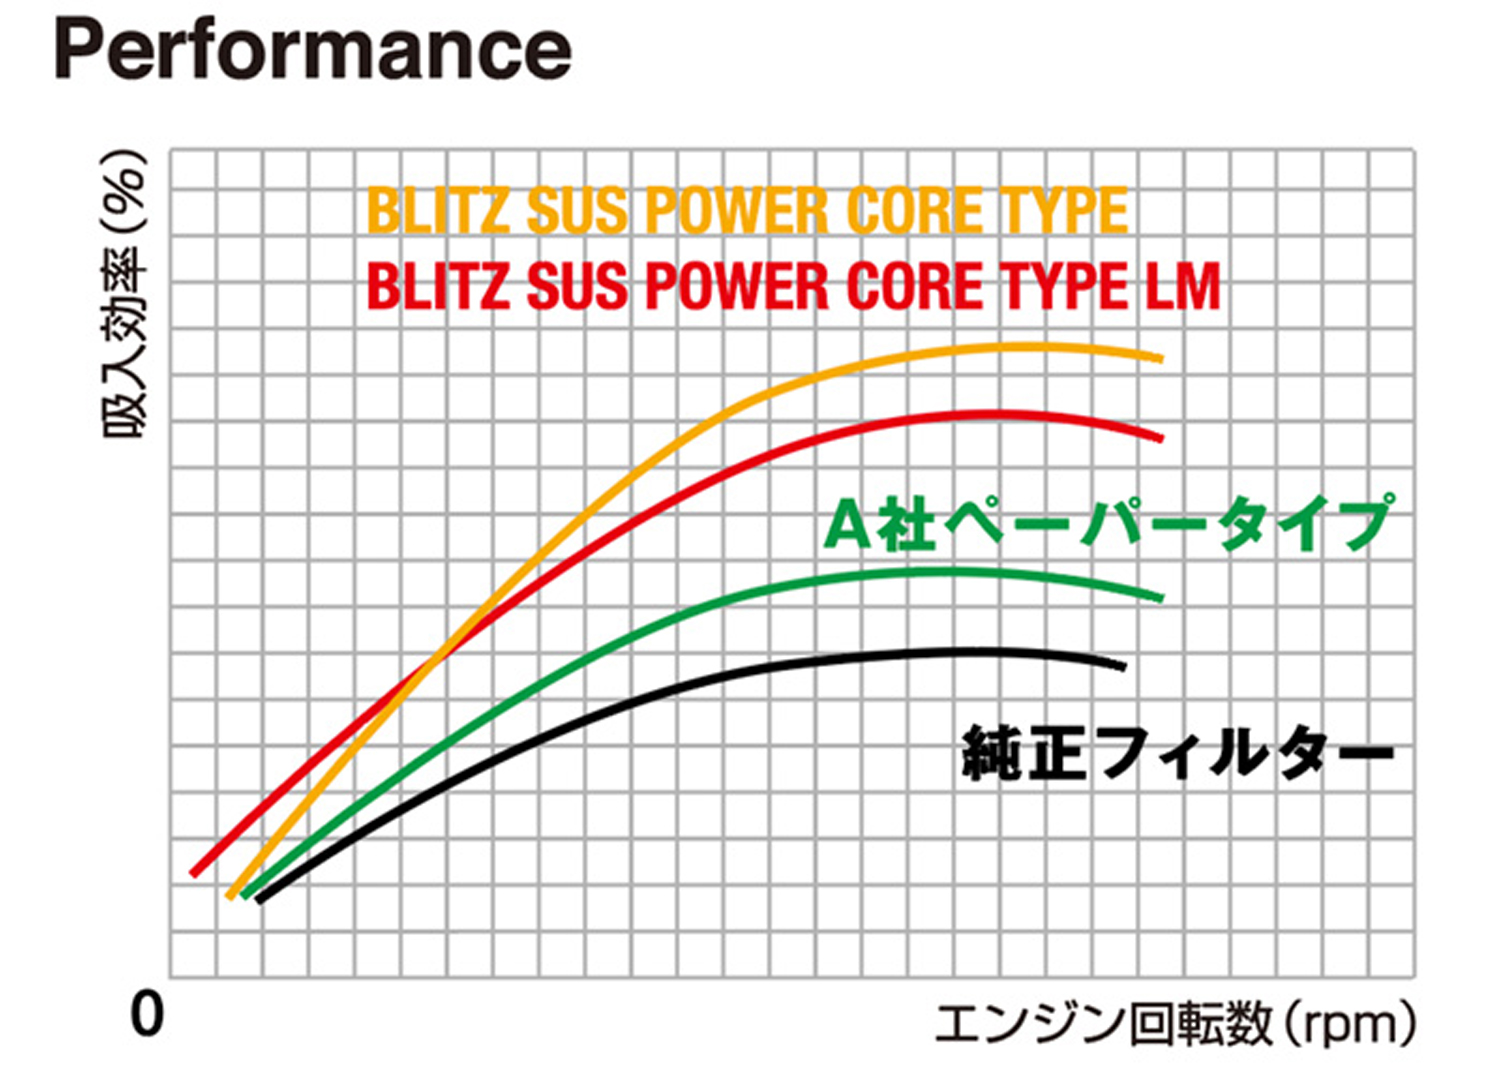 BLITZ SUS POWER CORE TYPE LM BLUE ニッサン ノートニスモ S NOTE